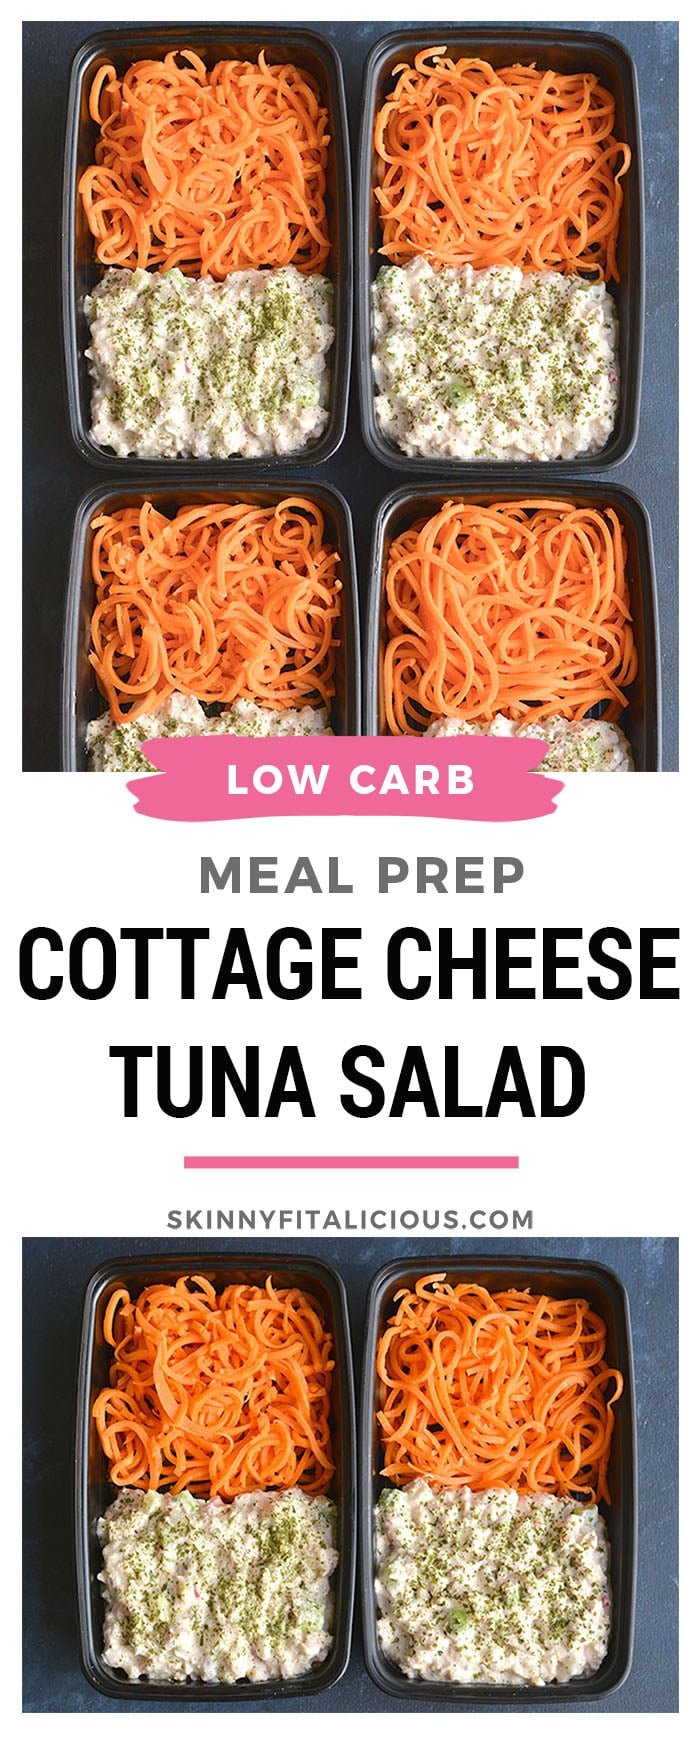 Meal Prep Cottage Cheese Tuna Salad! This high protein tuna salad is perfect for meal prep or a BBQ. Blended cottage cheese and seasonings is tossed with tuna, celery and radishes for a refreshing and filling meal. Pair with carrot noodles or your favorite low carb veggie side! Gluten Free + Low Calorie + Low Carb